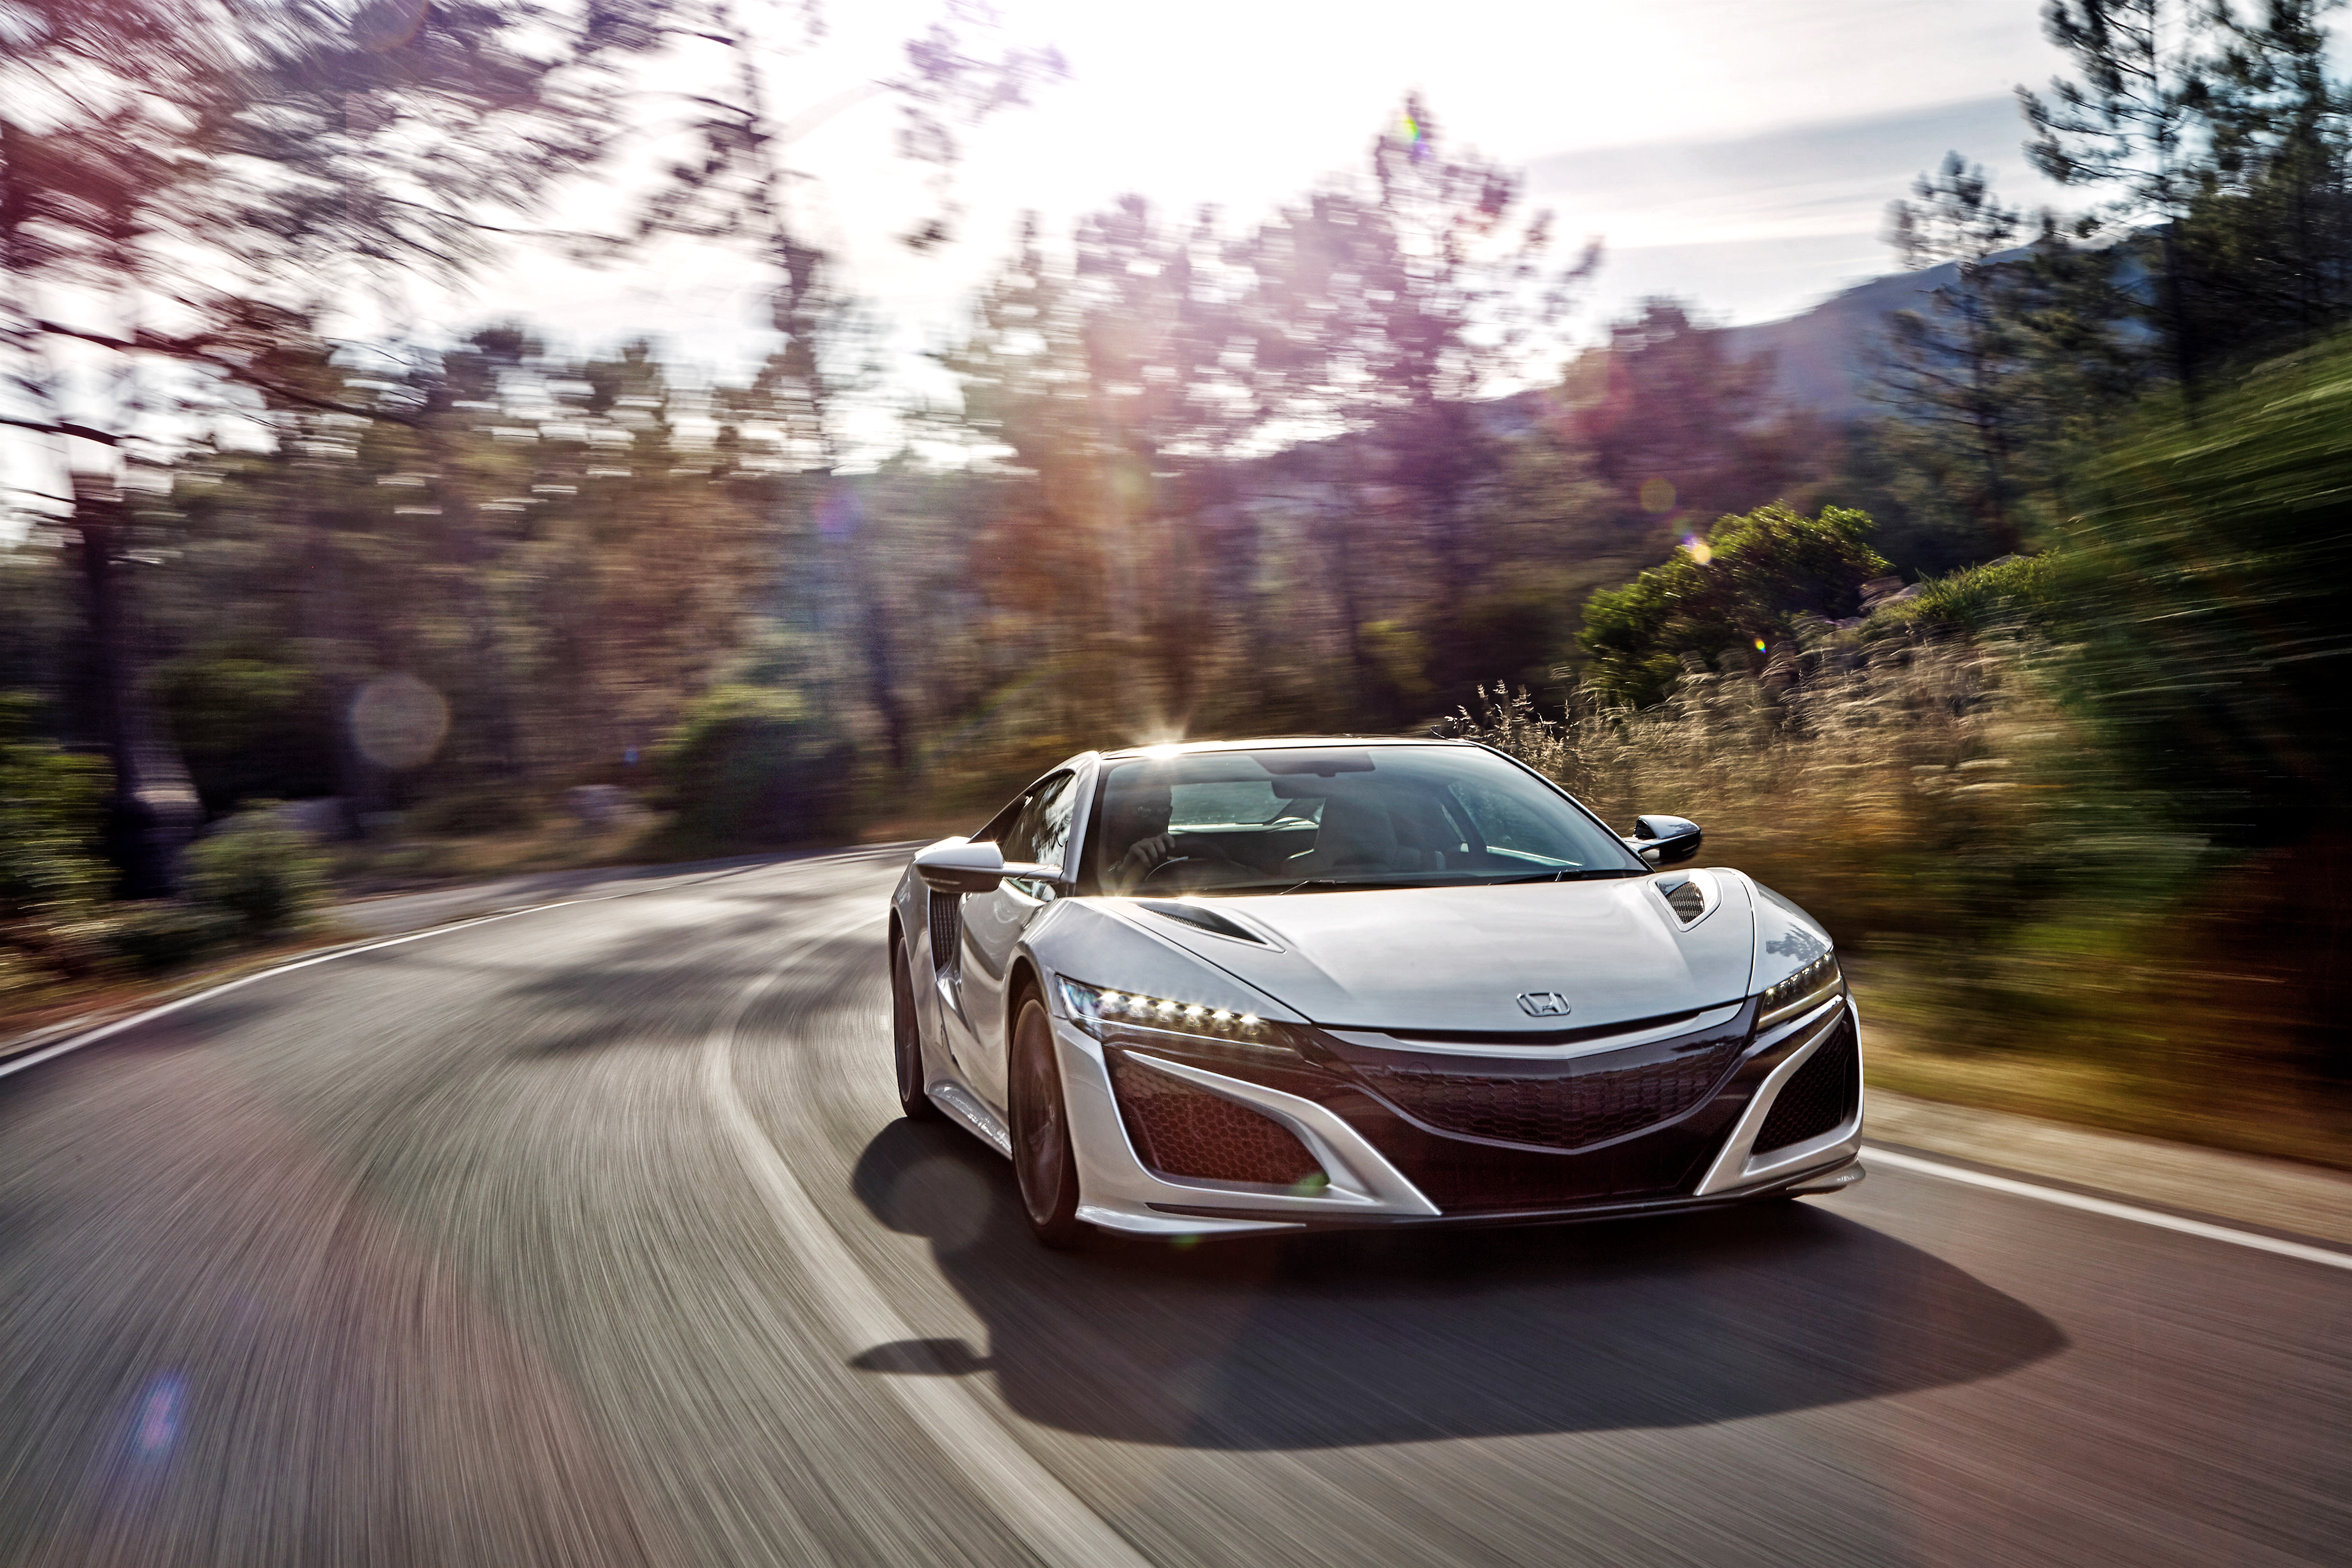 Images & Pictures front view, nsx, speed, cars Honda